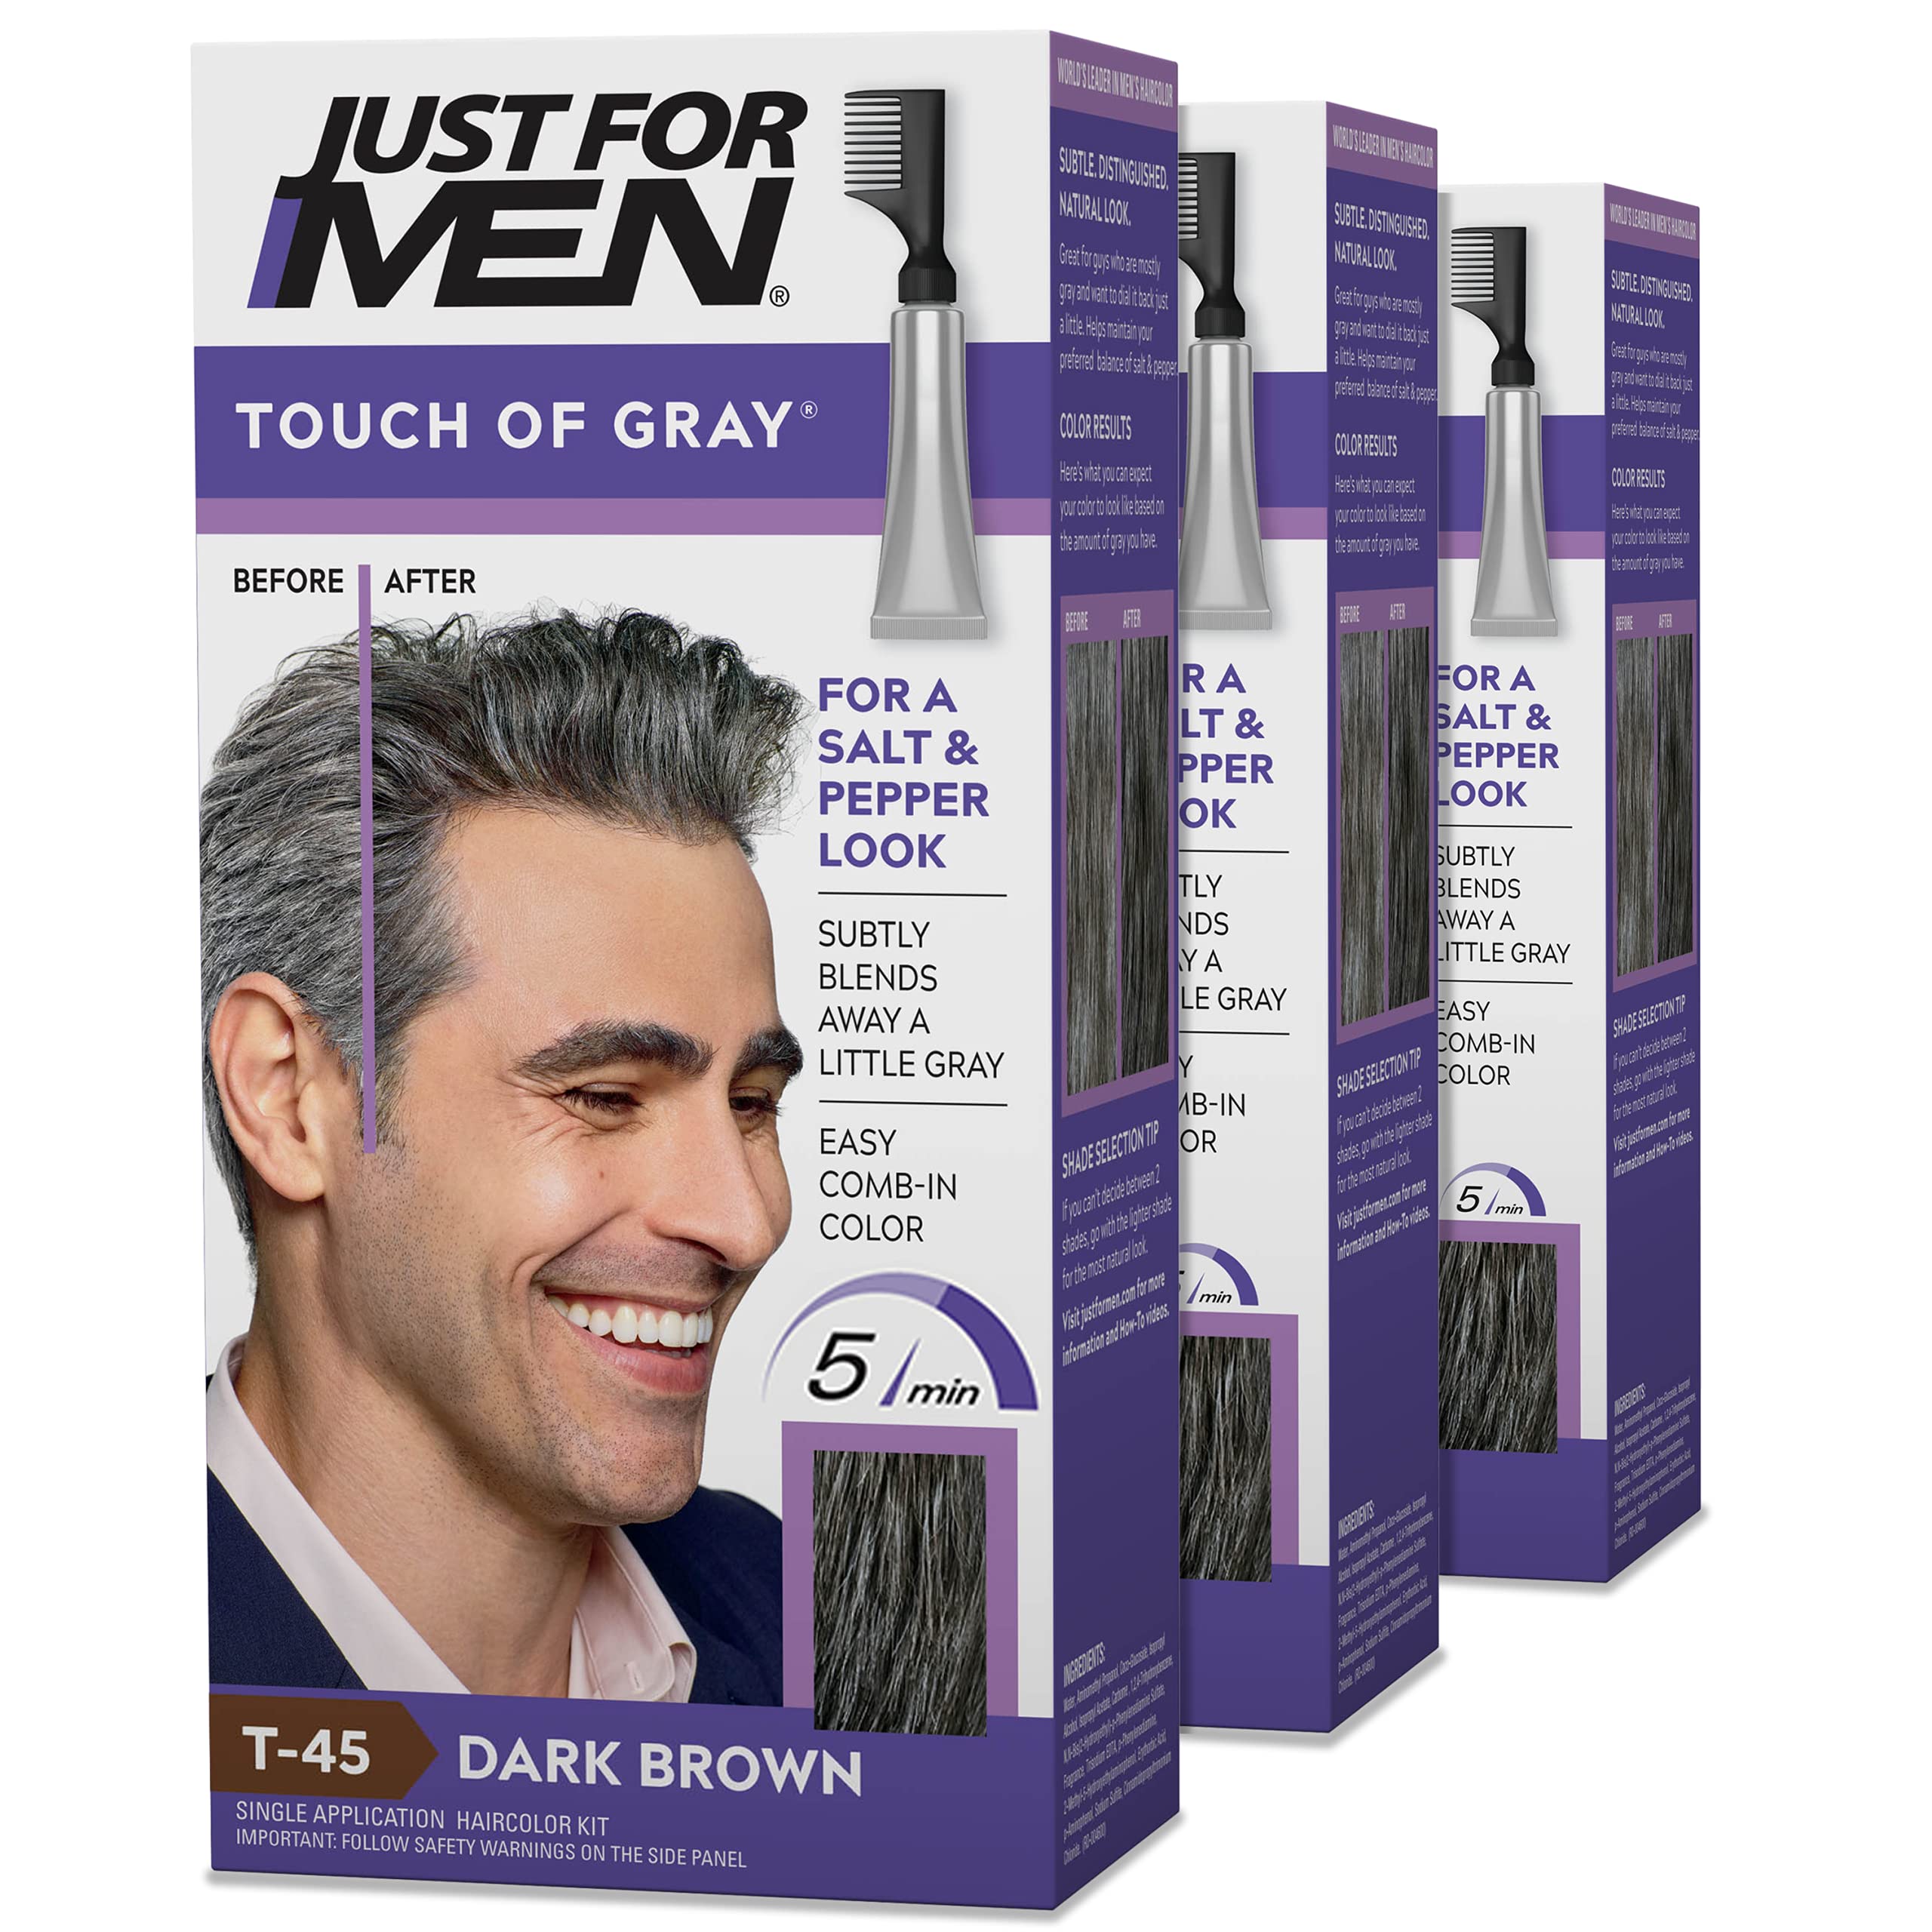 Just For Men Touch of Gray, Mens Hair Color Kit with Comb Applicator for Easy Application, Great for a Salt and Pepper Look - Dark Brown, T-45, Pack of 3